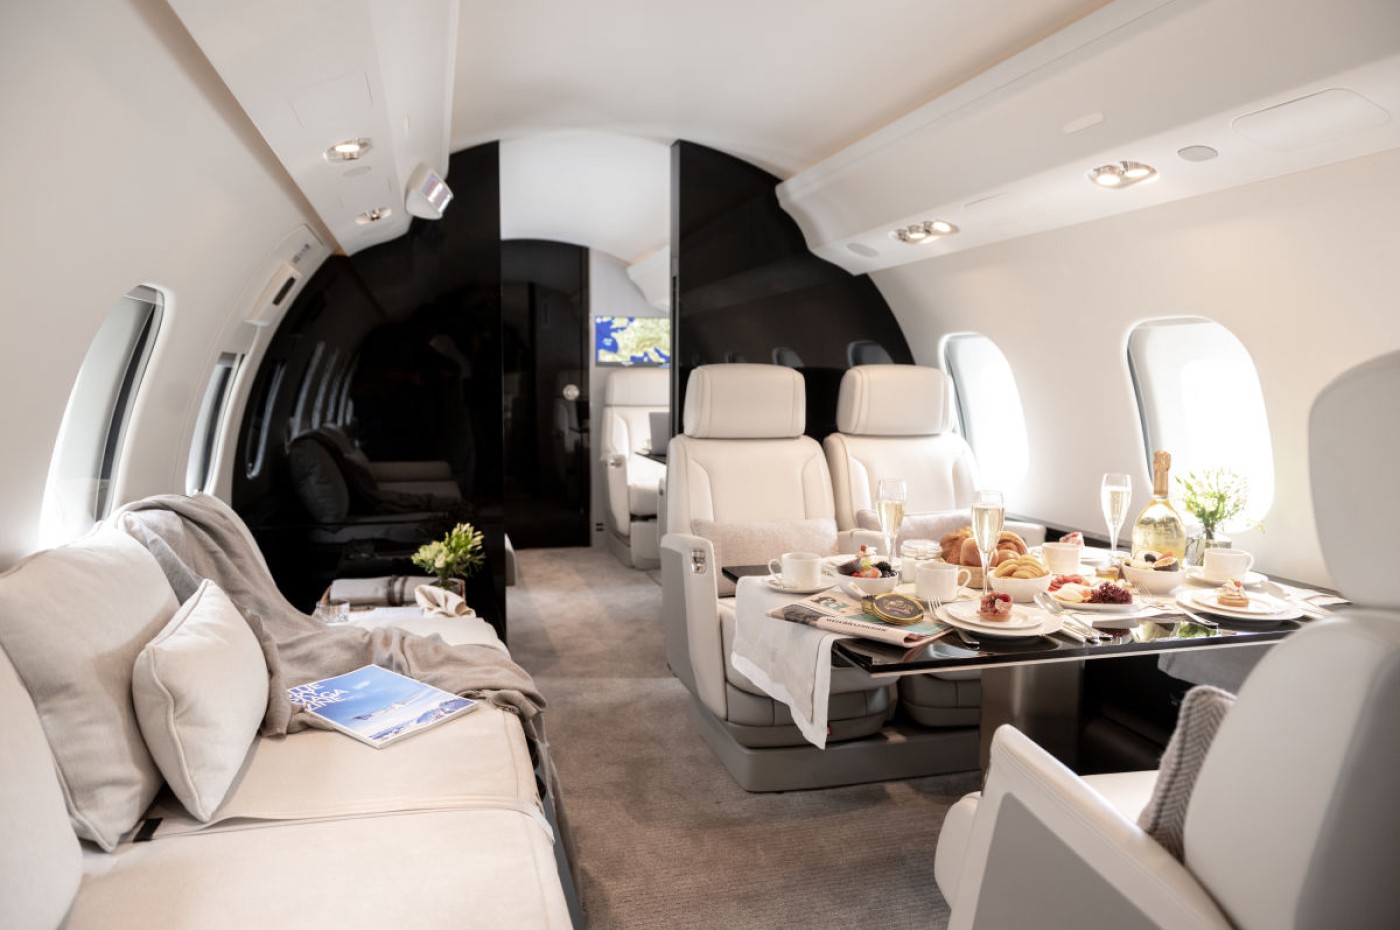 Global 6500 S/N 60075 conference suite